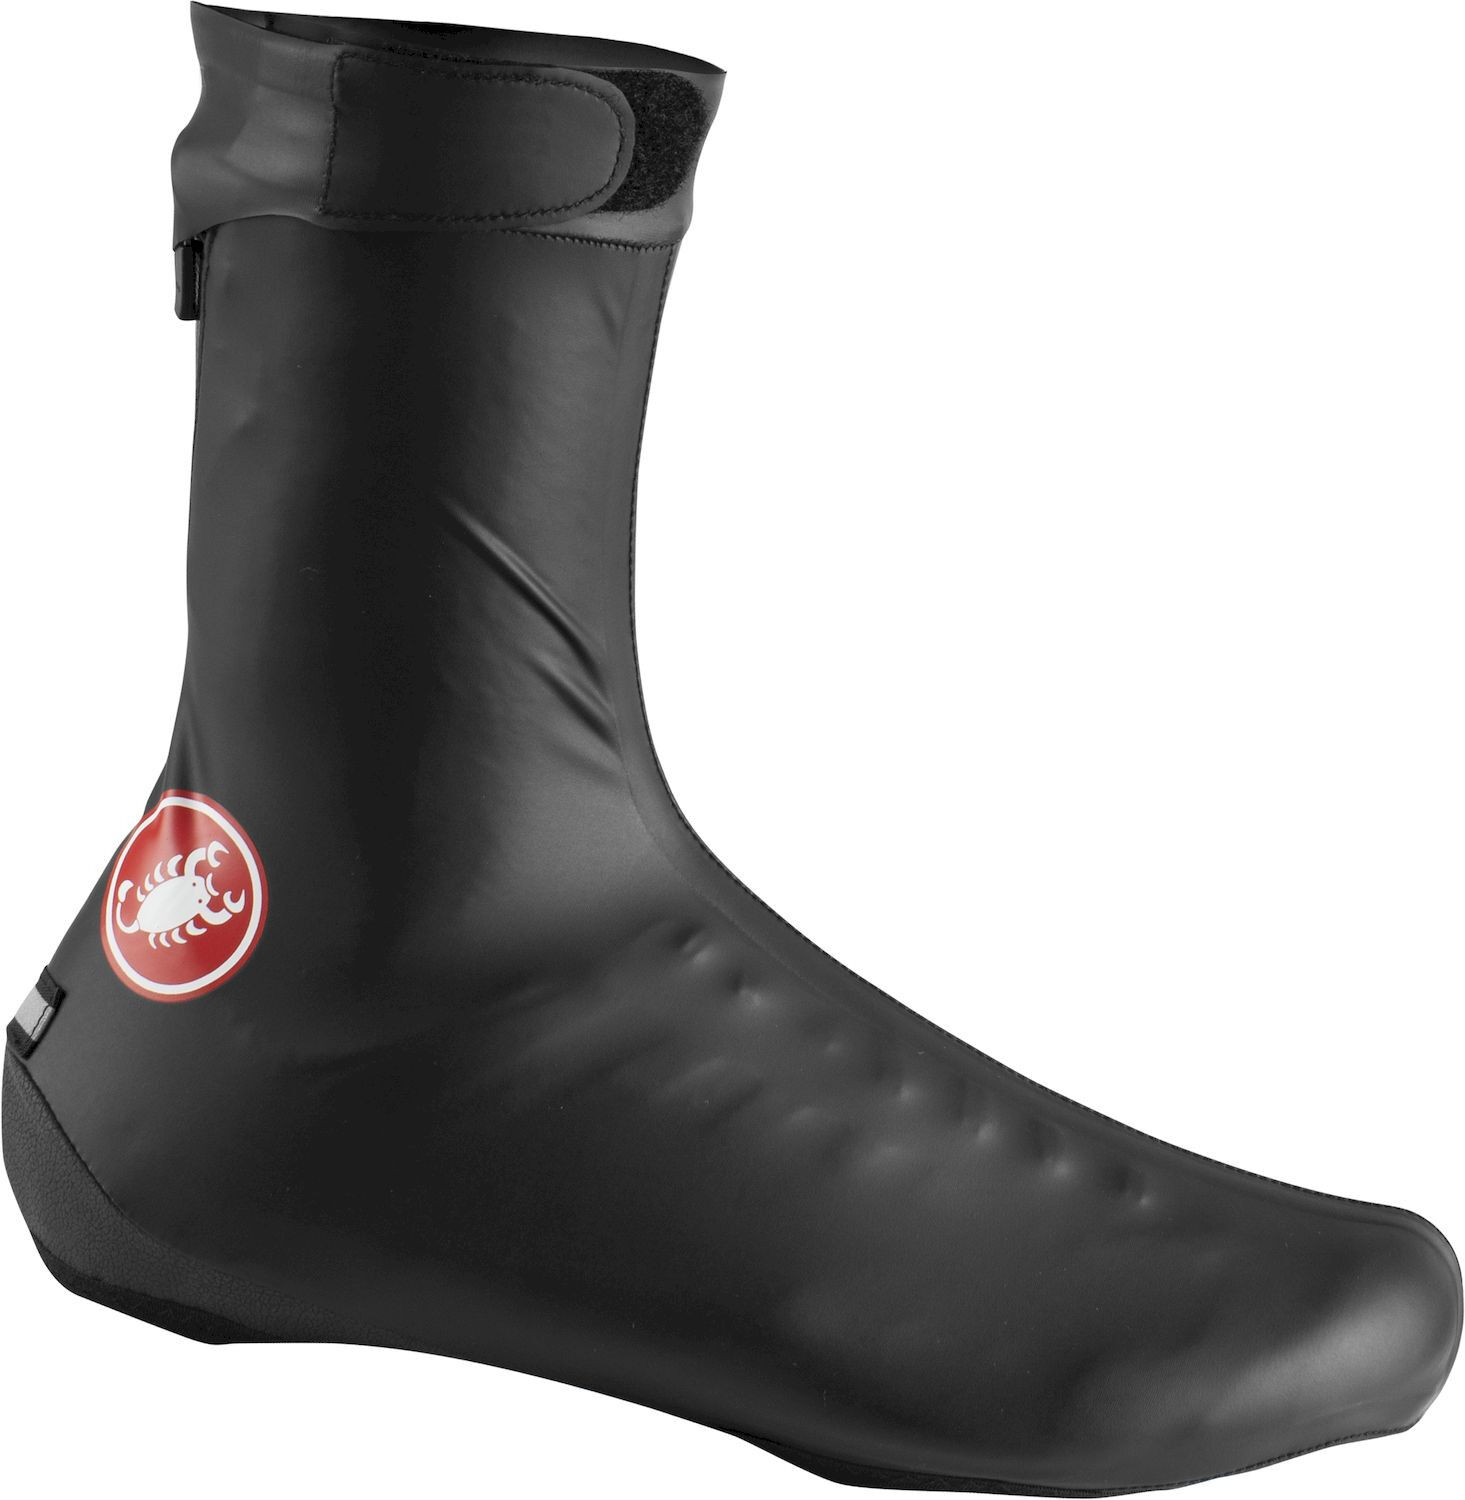 Castelli Pioggerella Shoecover - Cycling overshoes